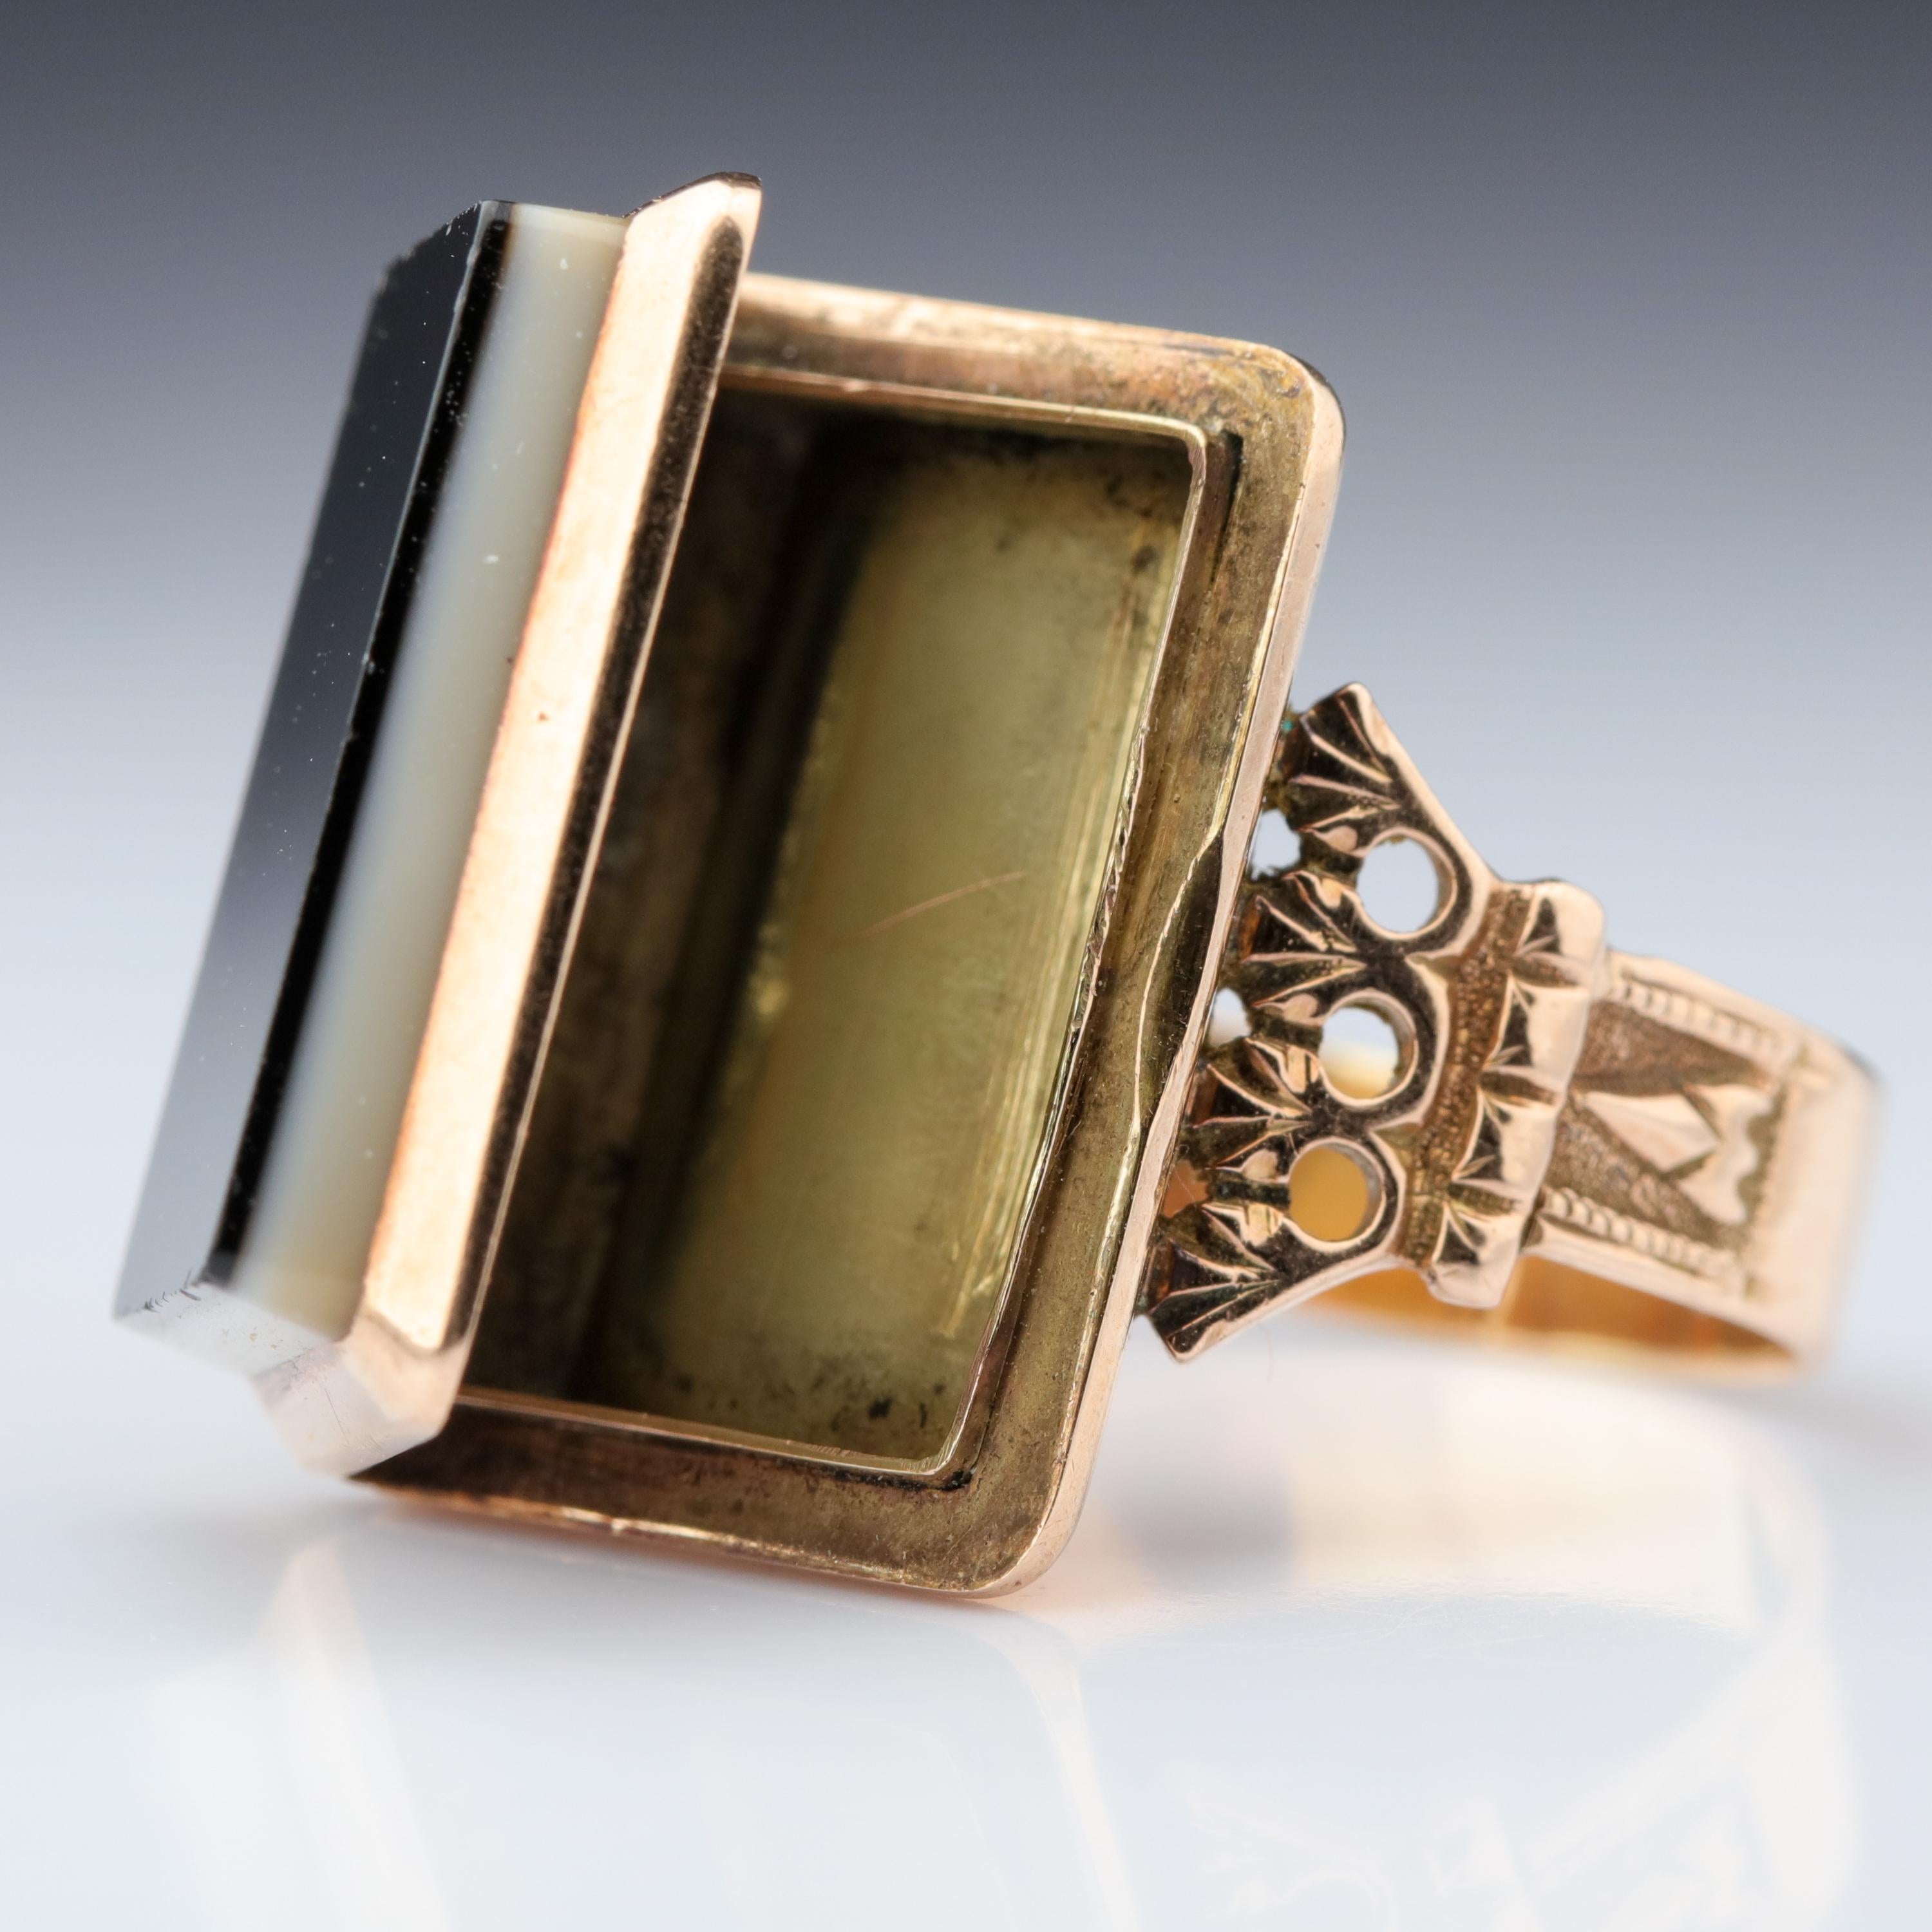 Georgian Poison Ring in Gold with Onyx is Cunningly Beautiful 1